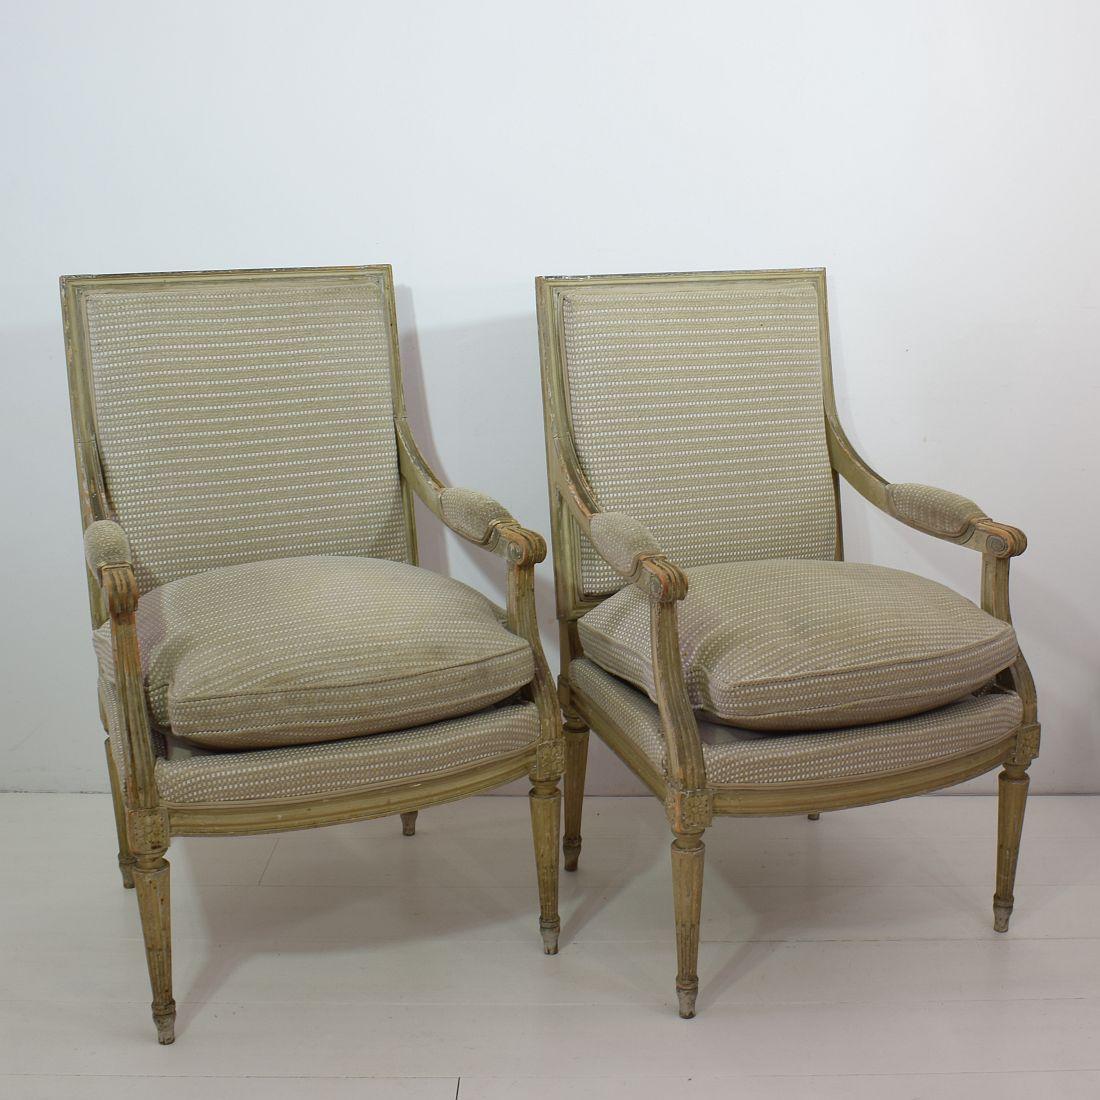 Beautiful pair of Louis XVI style armchairs, France, circa 1940, in beautiful weathered but structural good condition. They need new lining. 
Measure: Seat height is 47 cm. More pictures available on request.